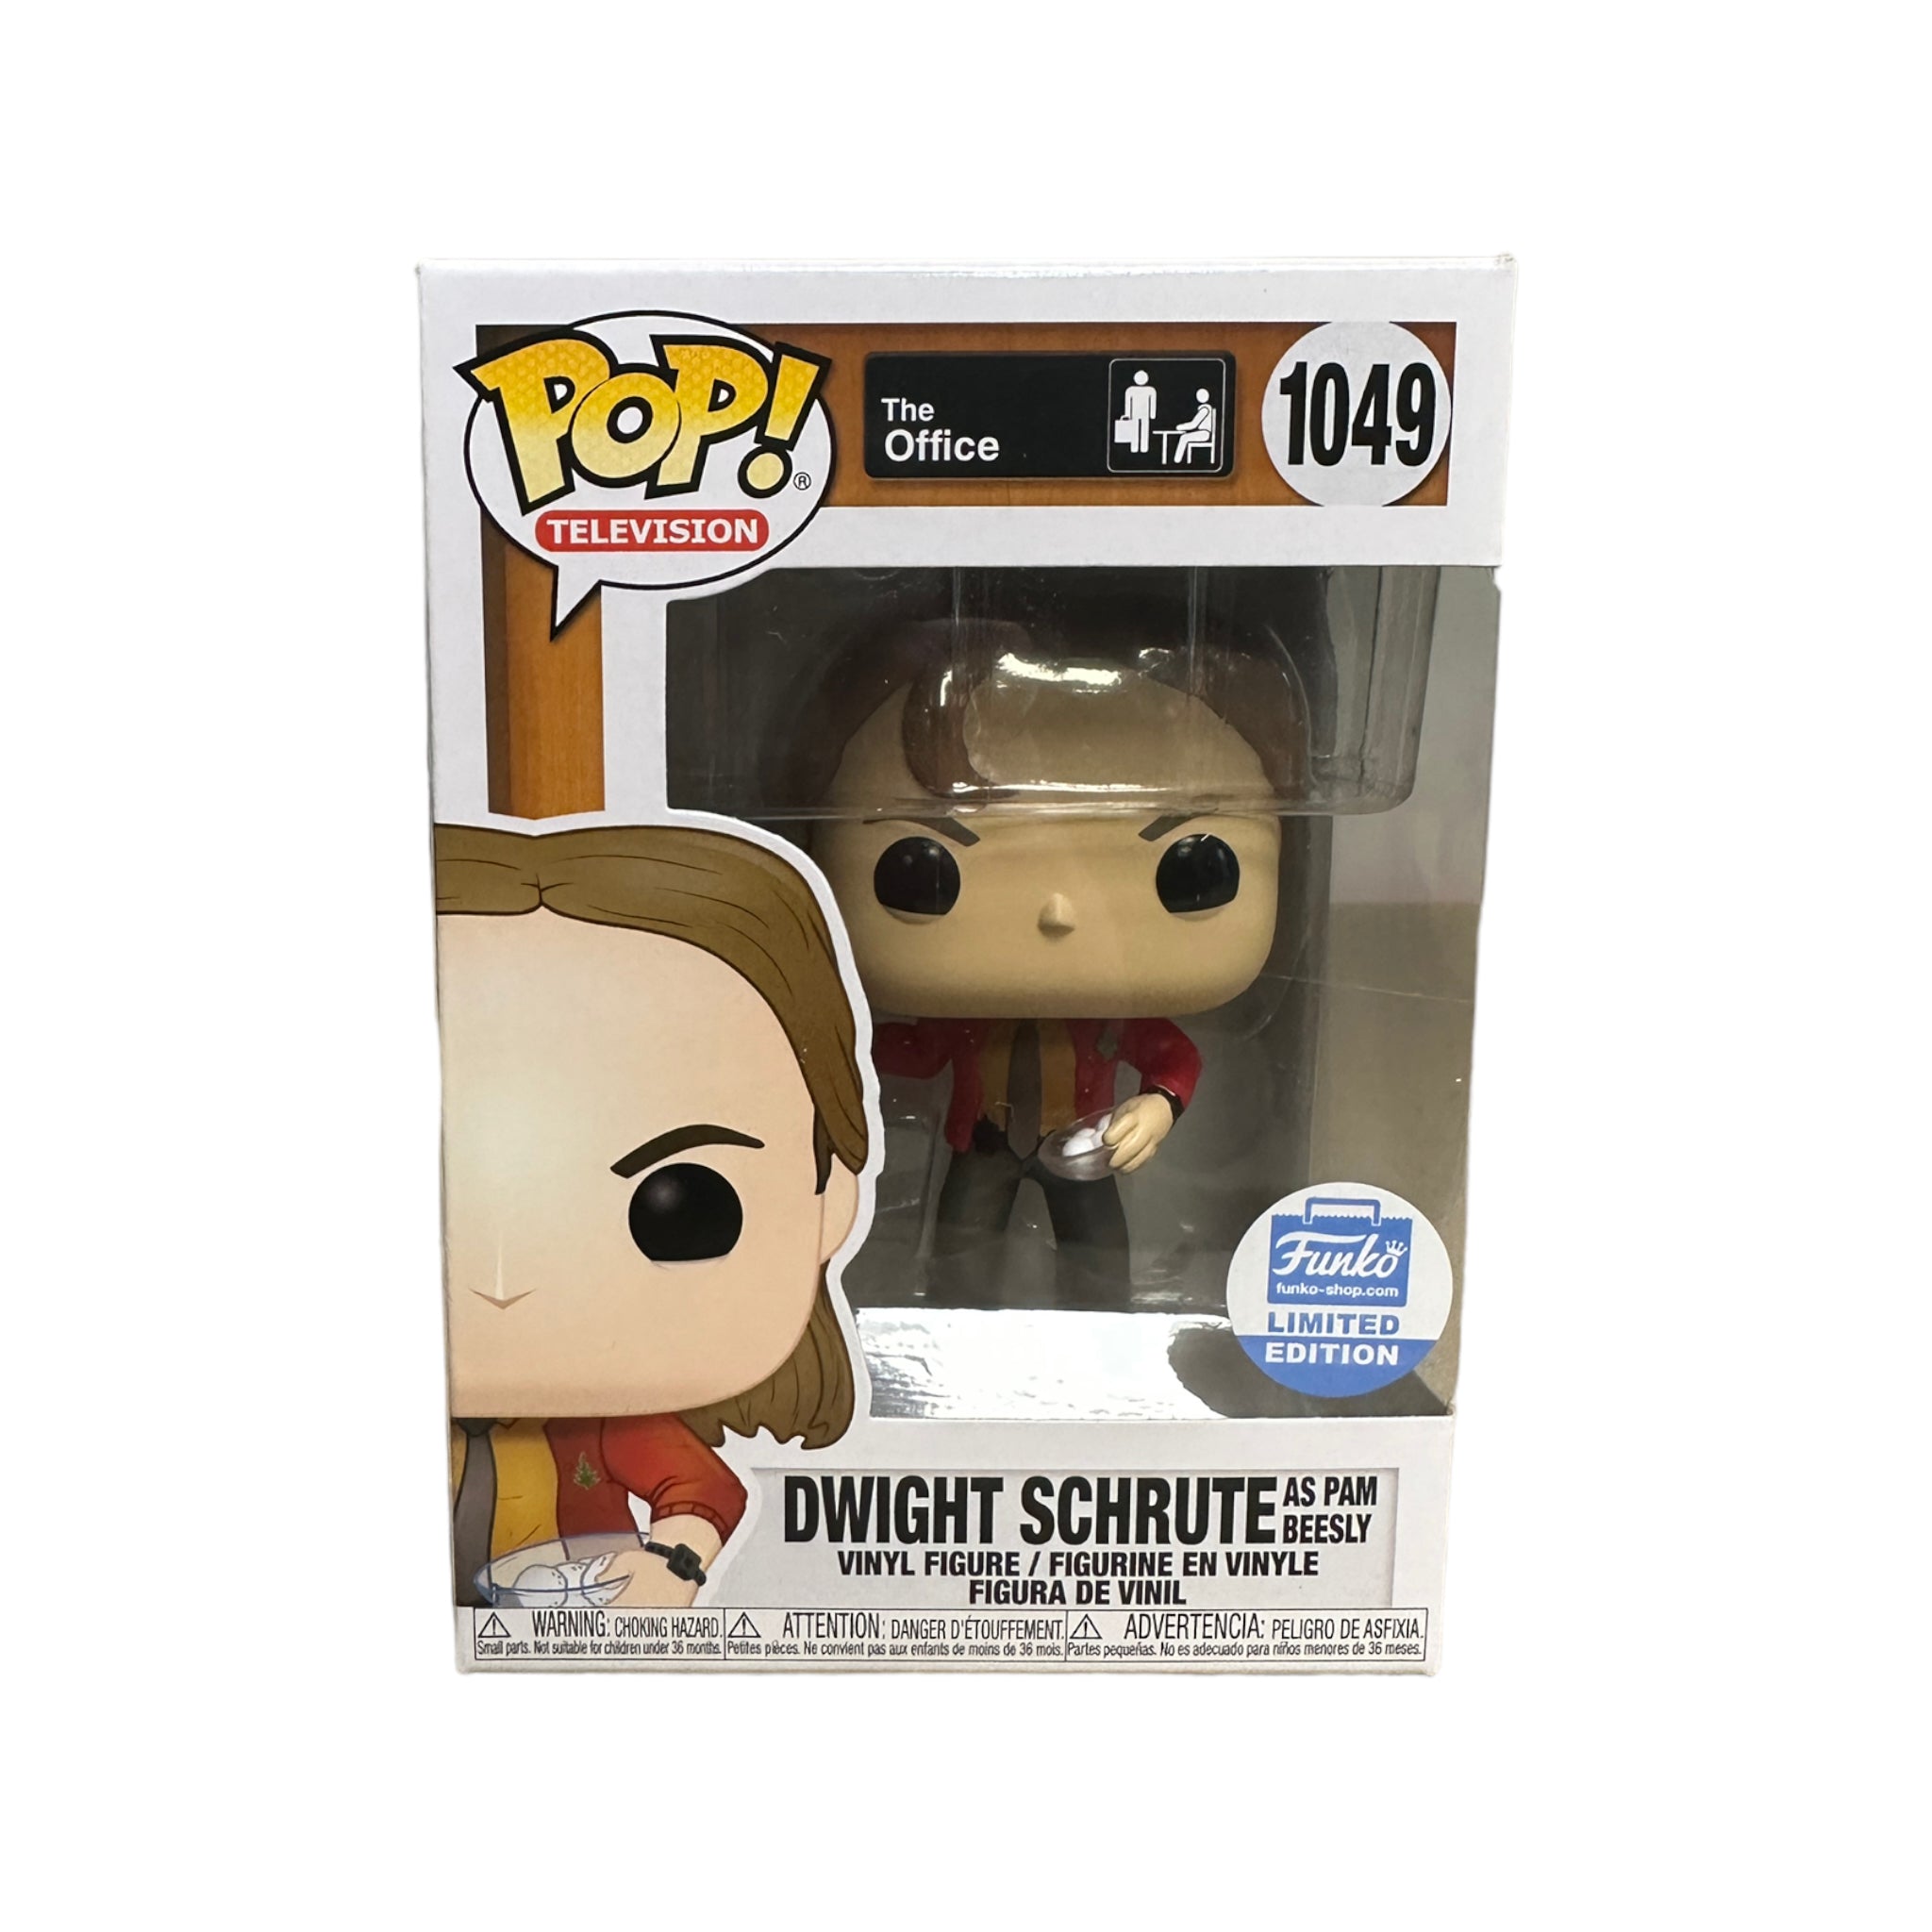 Dwight Schrute as Pam Beesly #1049 Funko Pop! - The Office - Funko Shop Exclusive - Condition 8.75/10